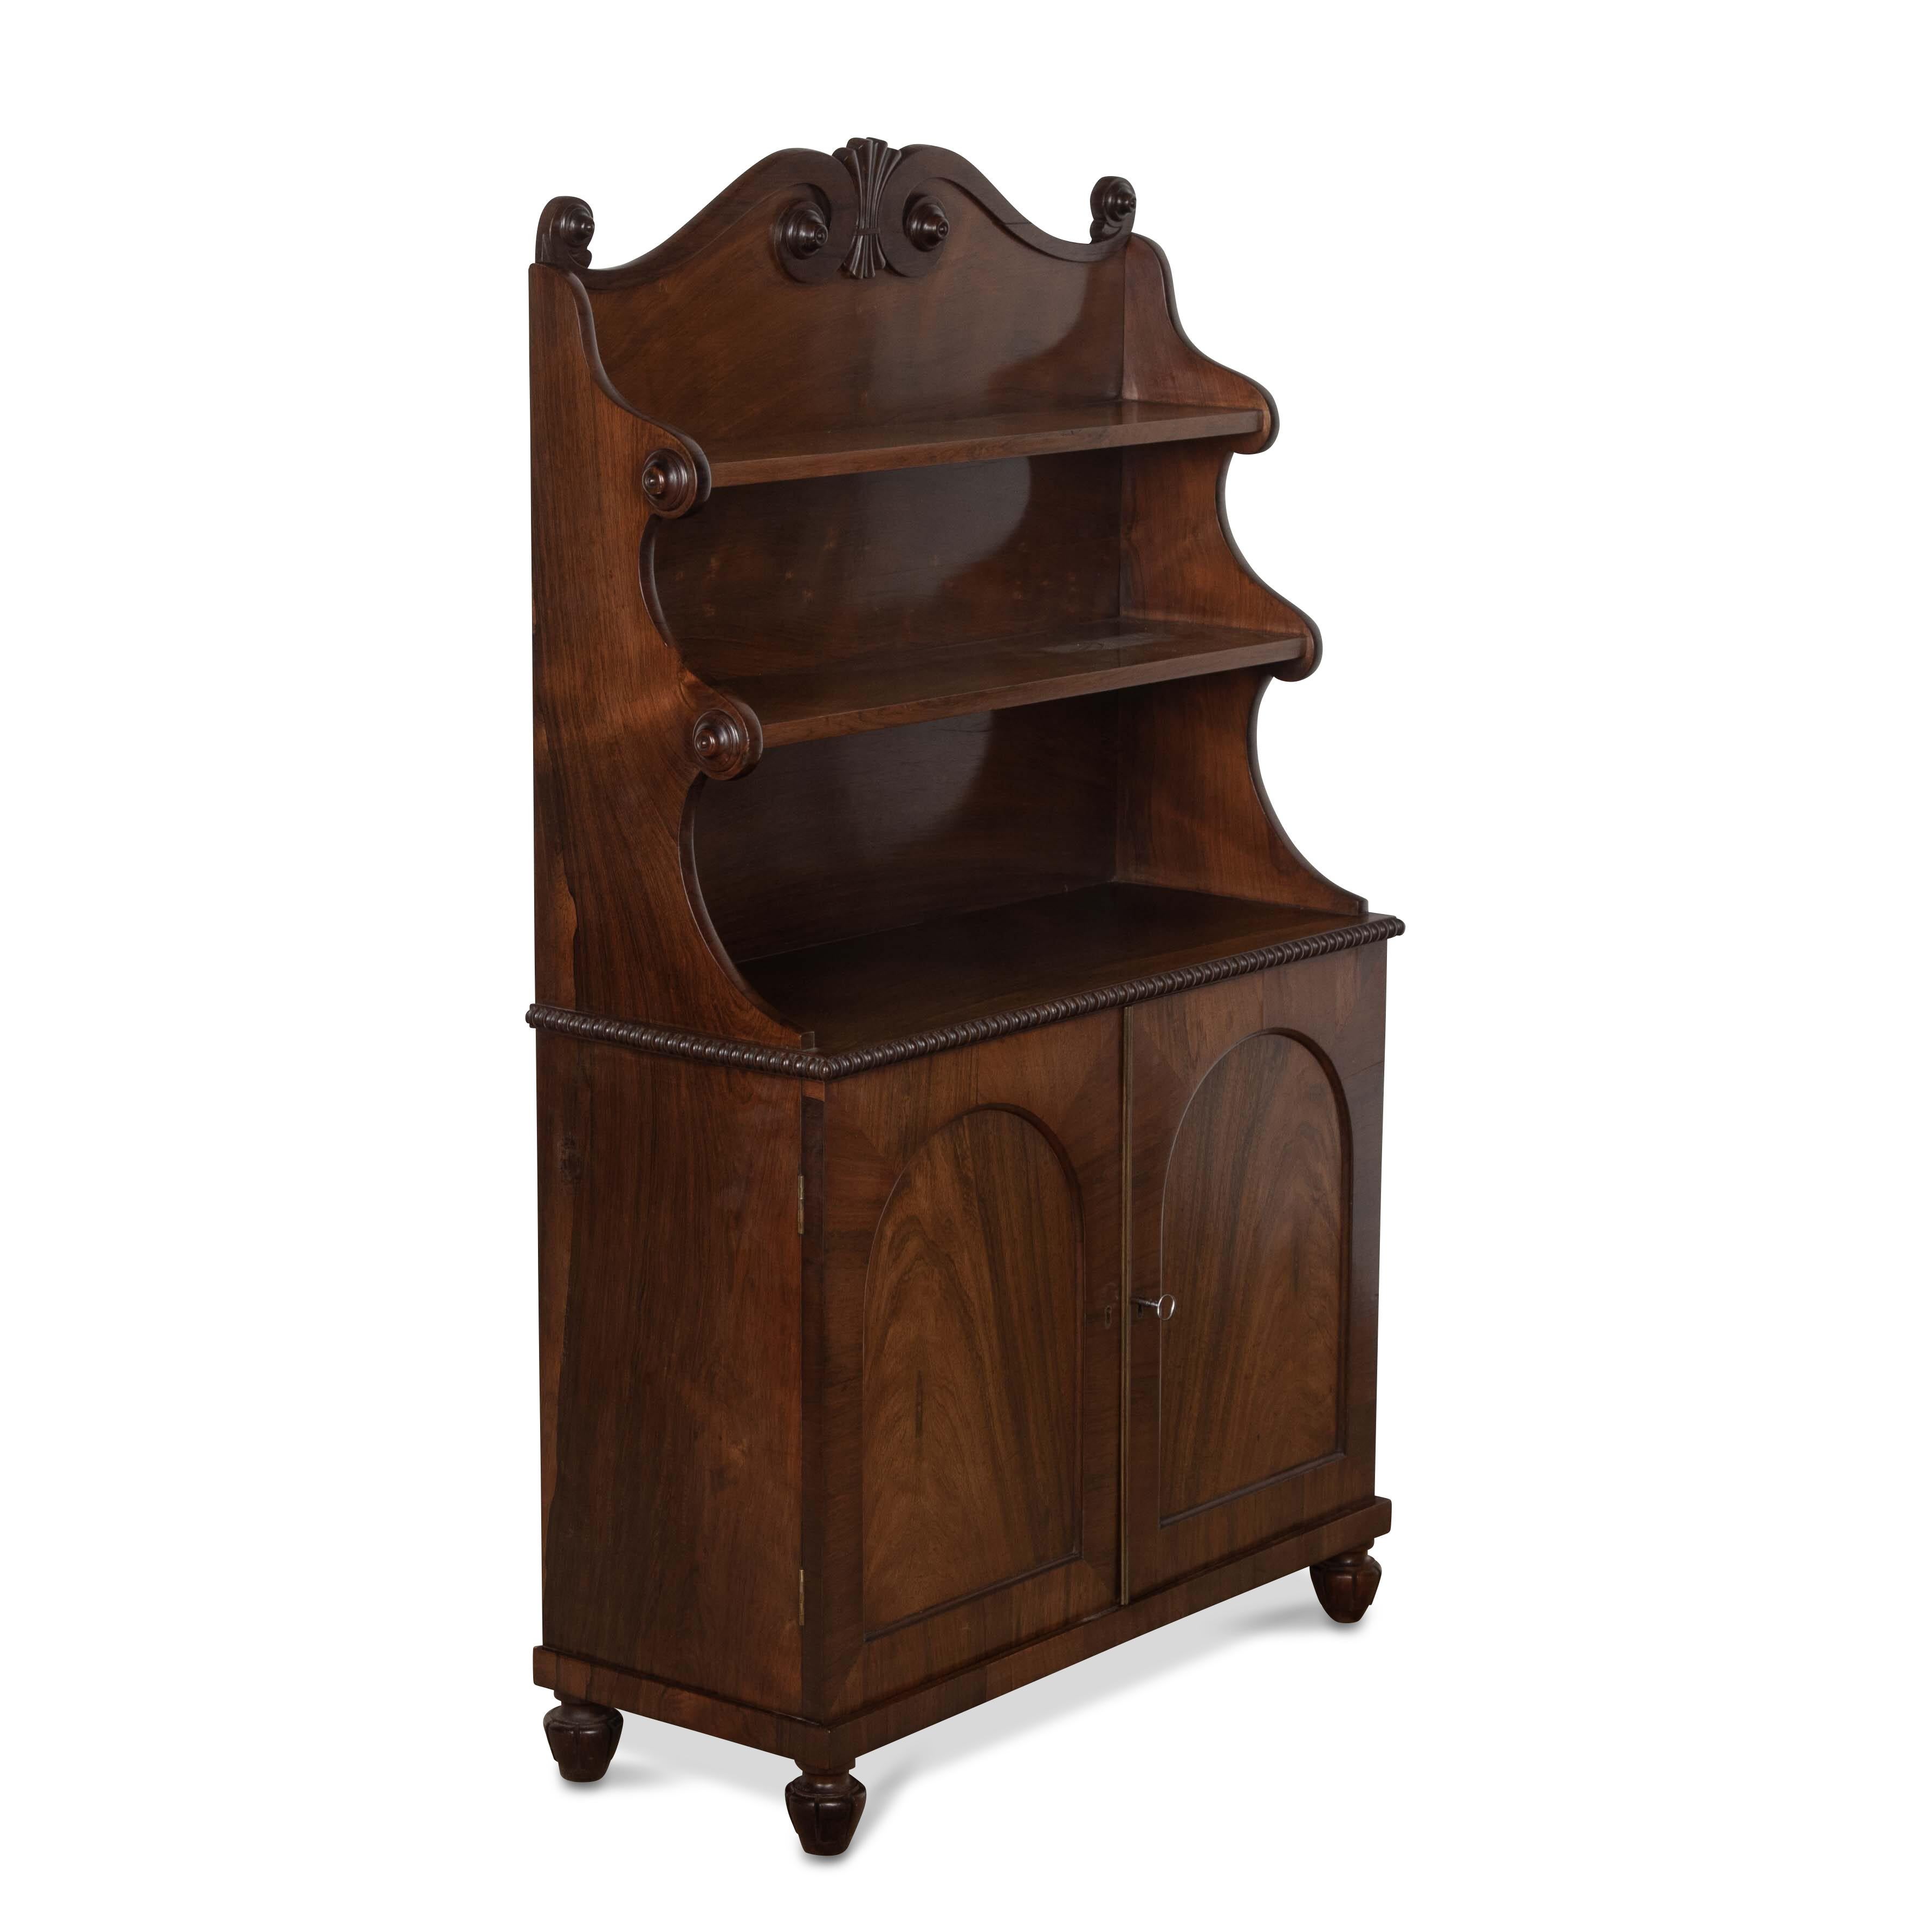 A regency rosewood side cabinet/bookcase of small proportions, the waterfall superstructure and scroll pediment with roundels. Above a cupboard base with a pair of arched panel doors opening to an adjustable shelf interior. Raised on tulip carved